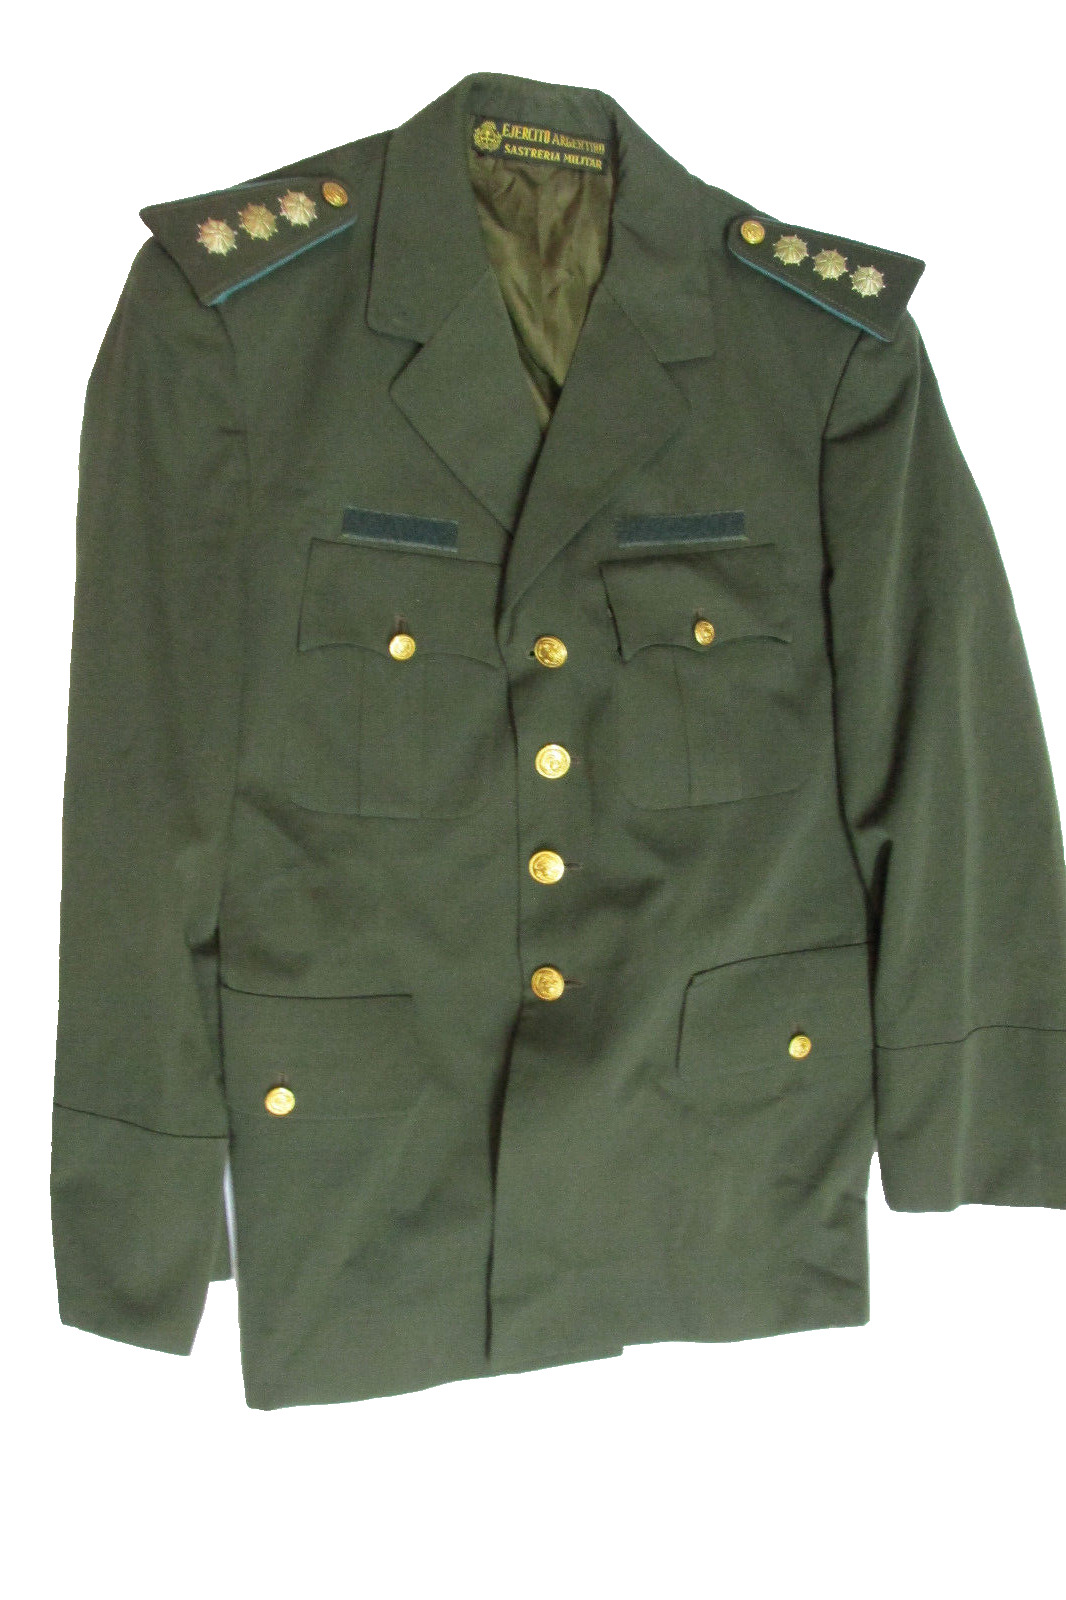 Interesting jacket for an Officer or Lieutenant of the Argentine Army